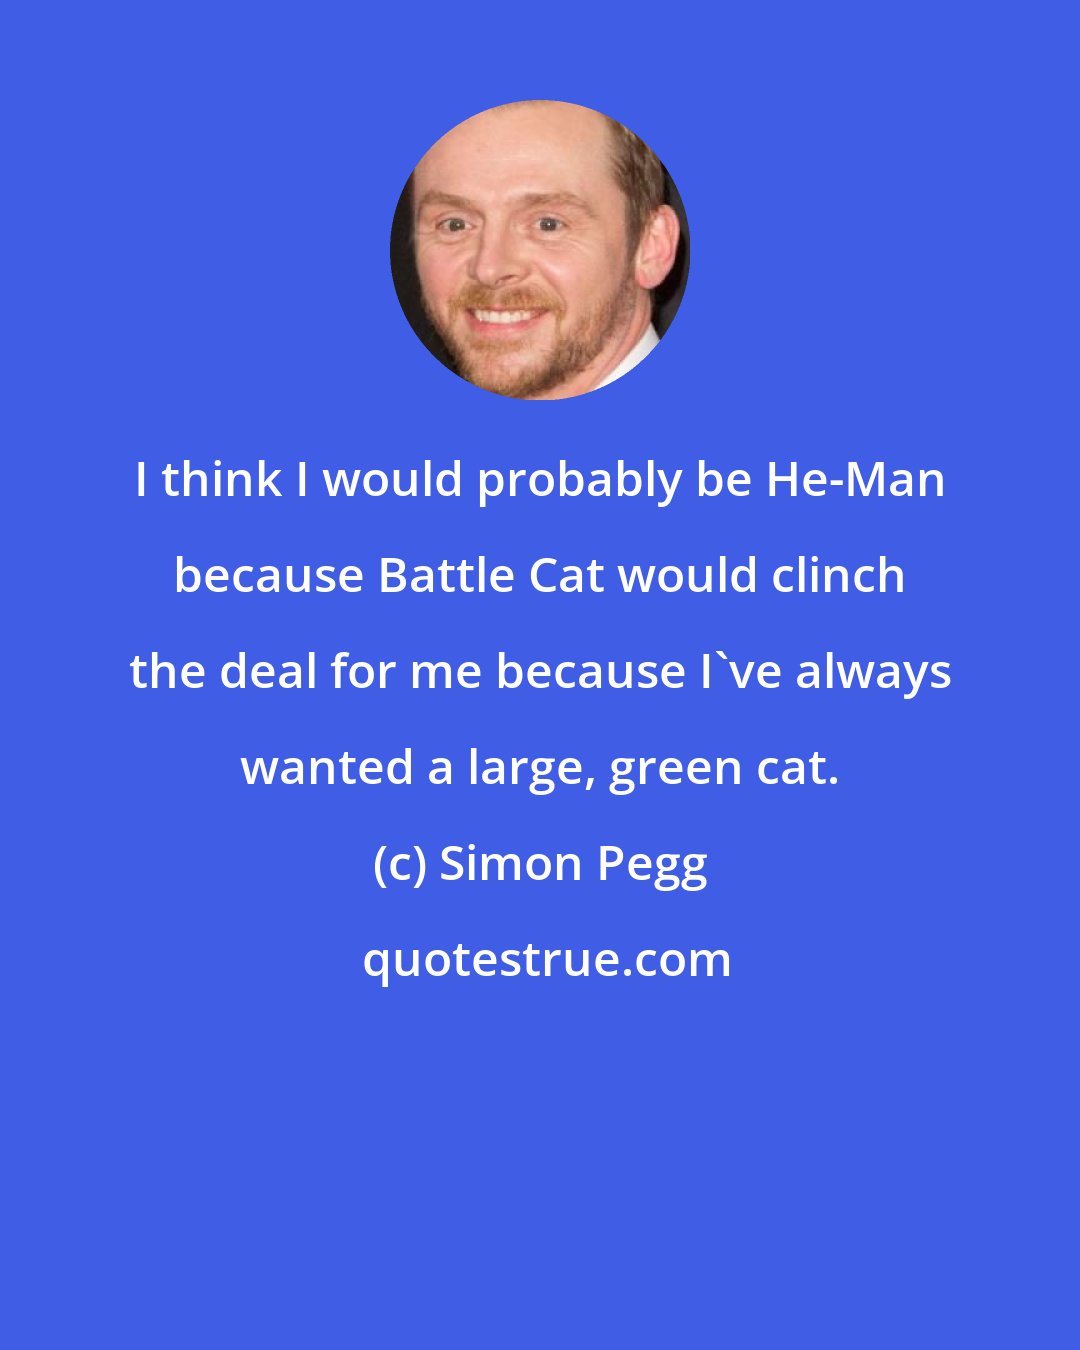 Simon Pegg: I think I would probably be He-Man because Battle Cat would clinch the deal for me because I've always wanted a large, green cat.